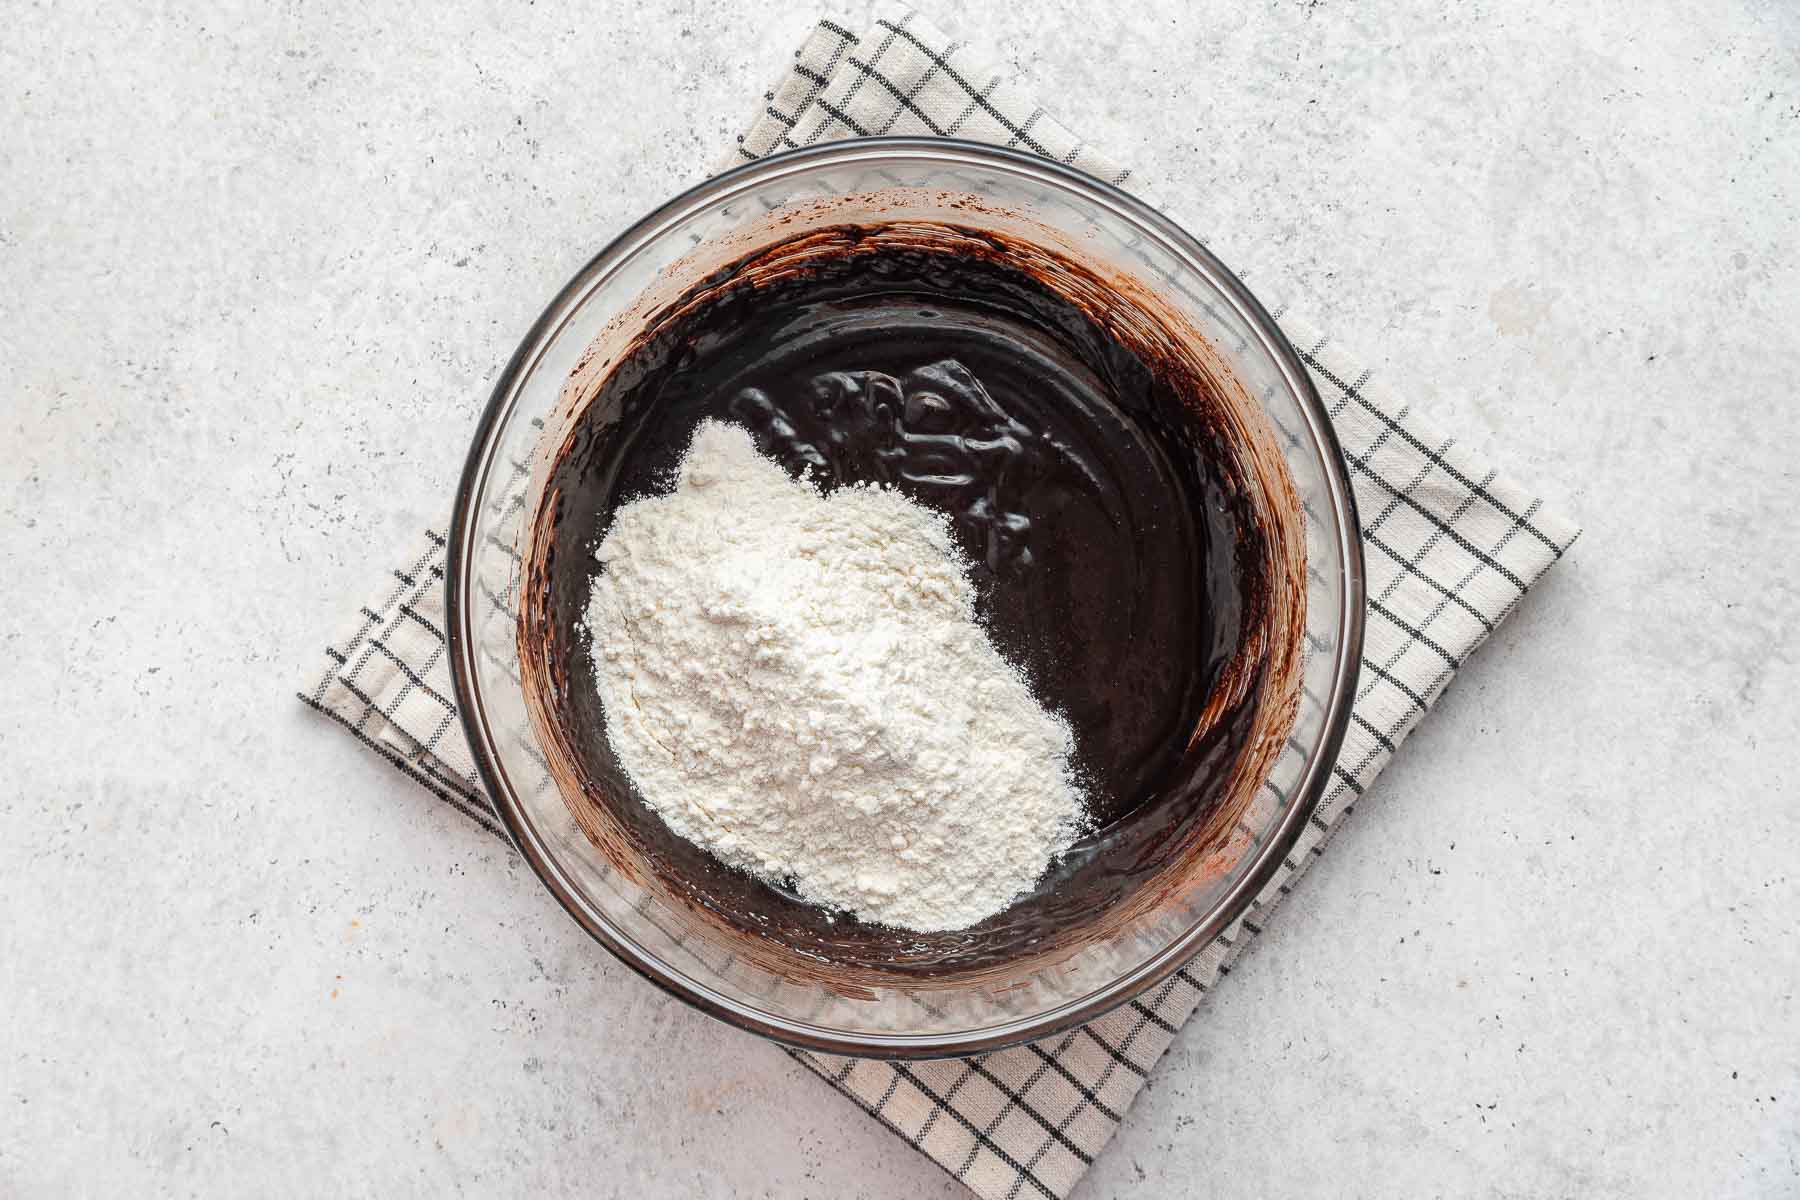 Adding flour to a raw brownie batter in a clear glass bowl.